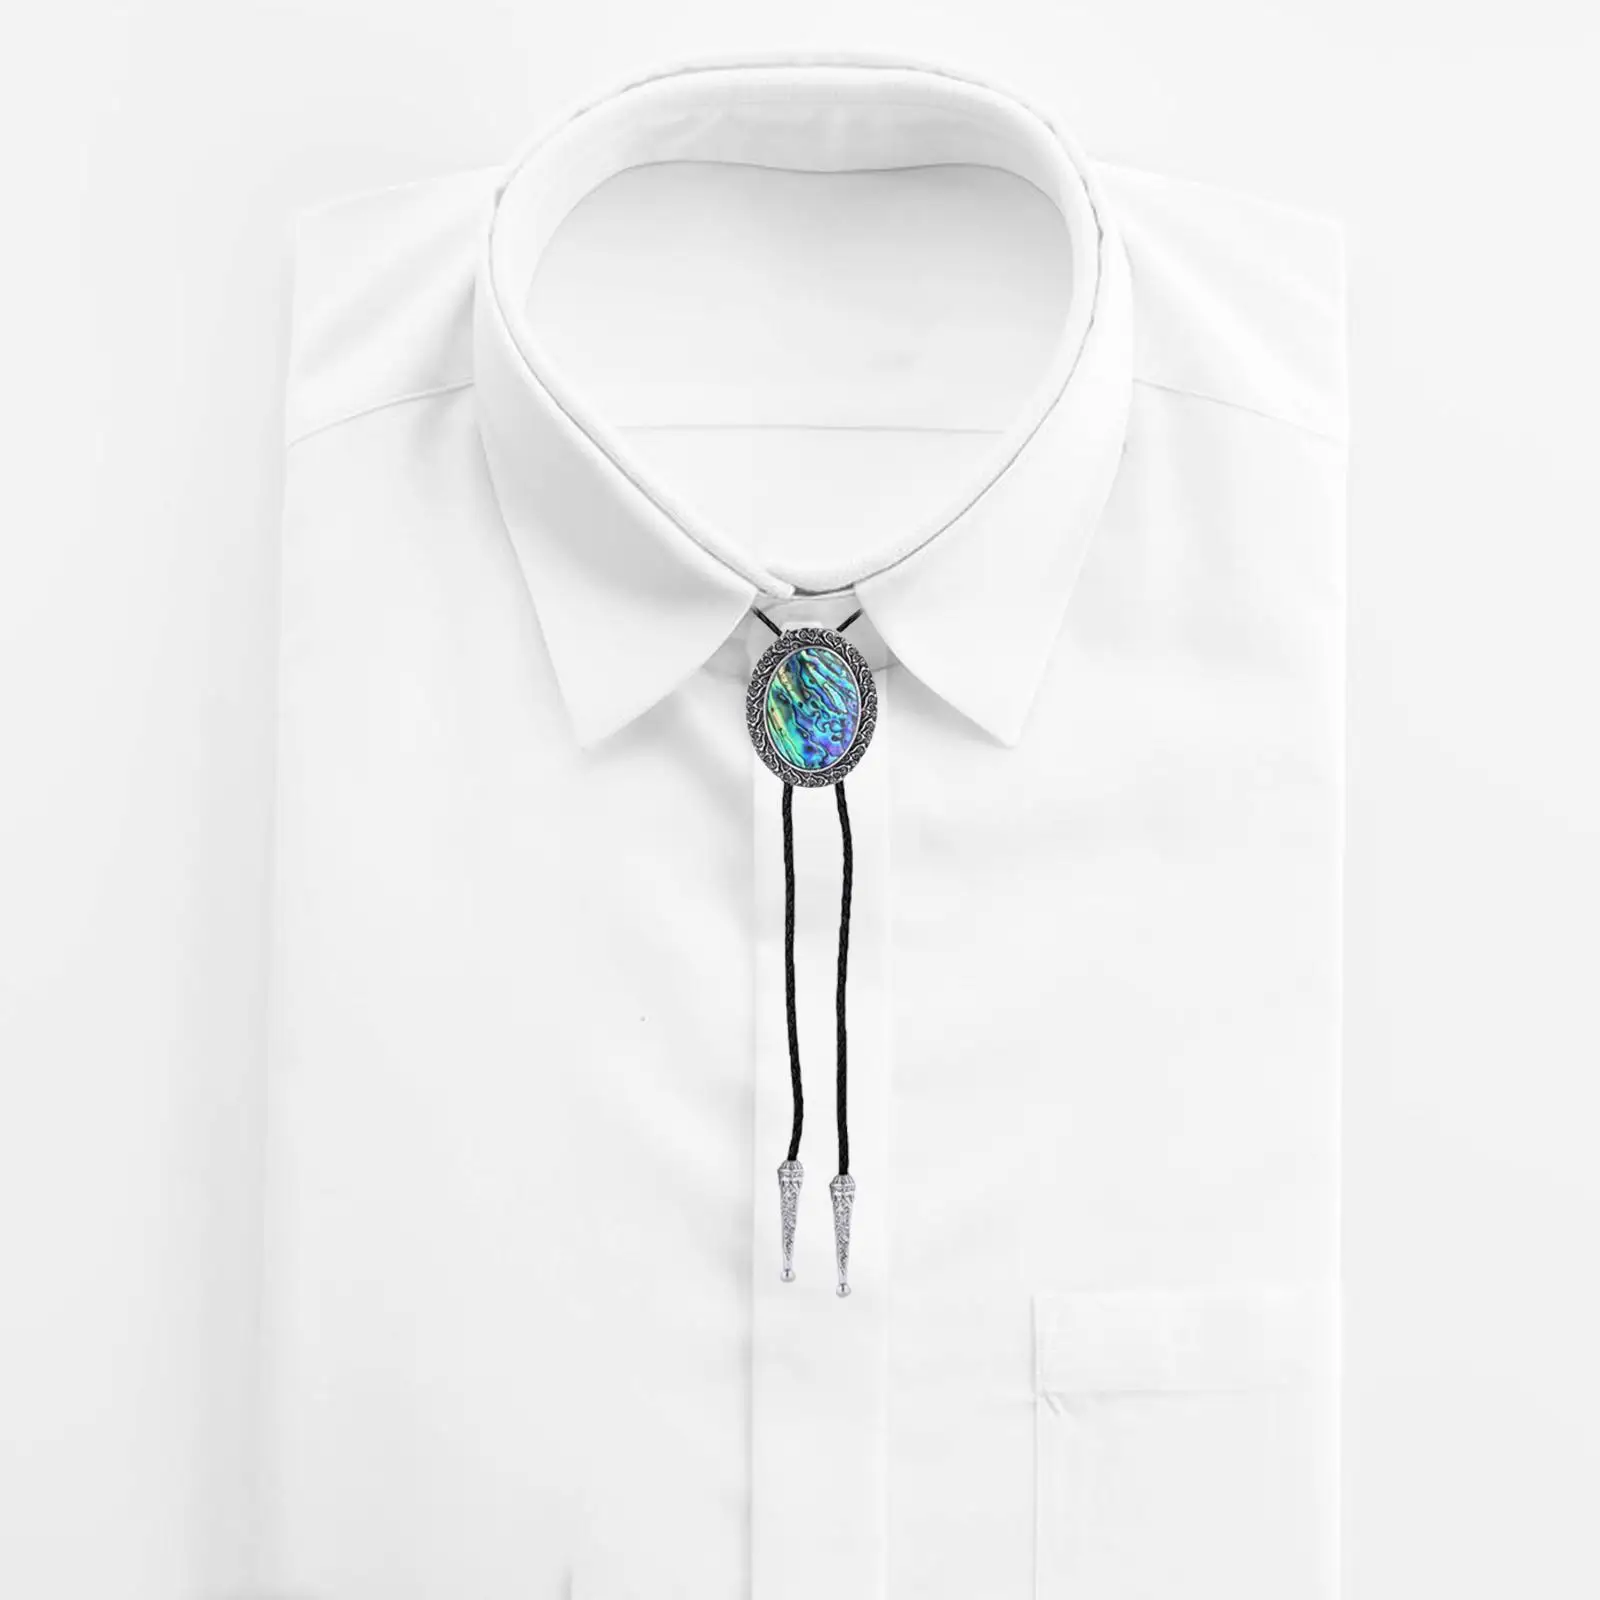 Stylish Western Bolo Tie Adjustable Rope Cowboy Necktie Costume Accessory with Pendant for Teens Adults Men Women Gift